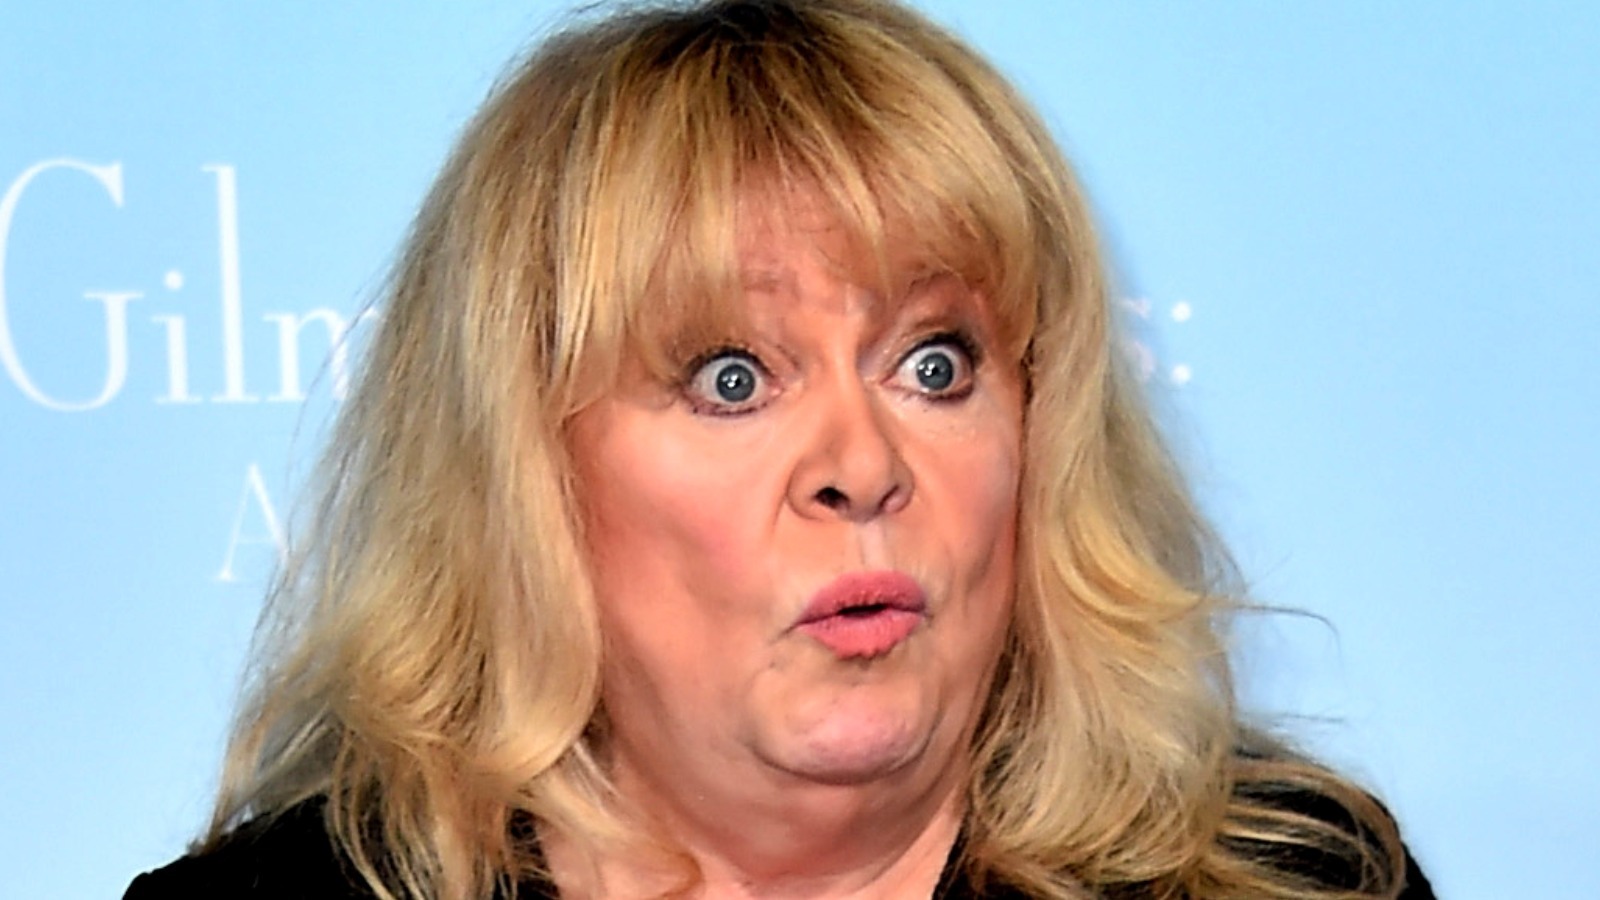 Sally Struthers Be In Yellowstone Season 4 - Release Date, Cast, and Plot kin 2022